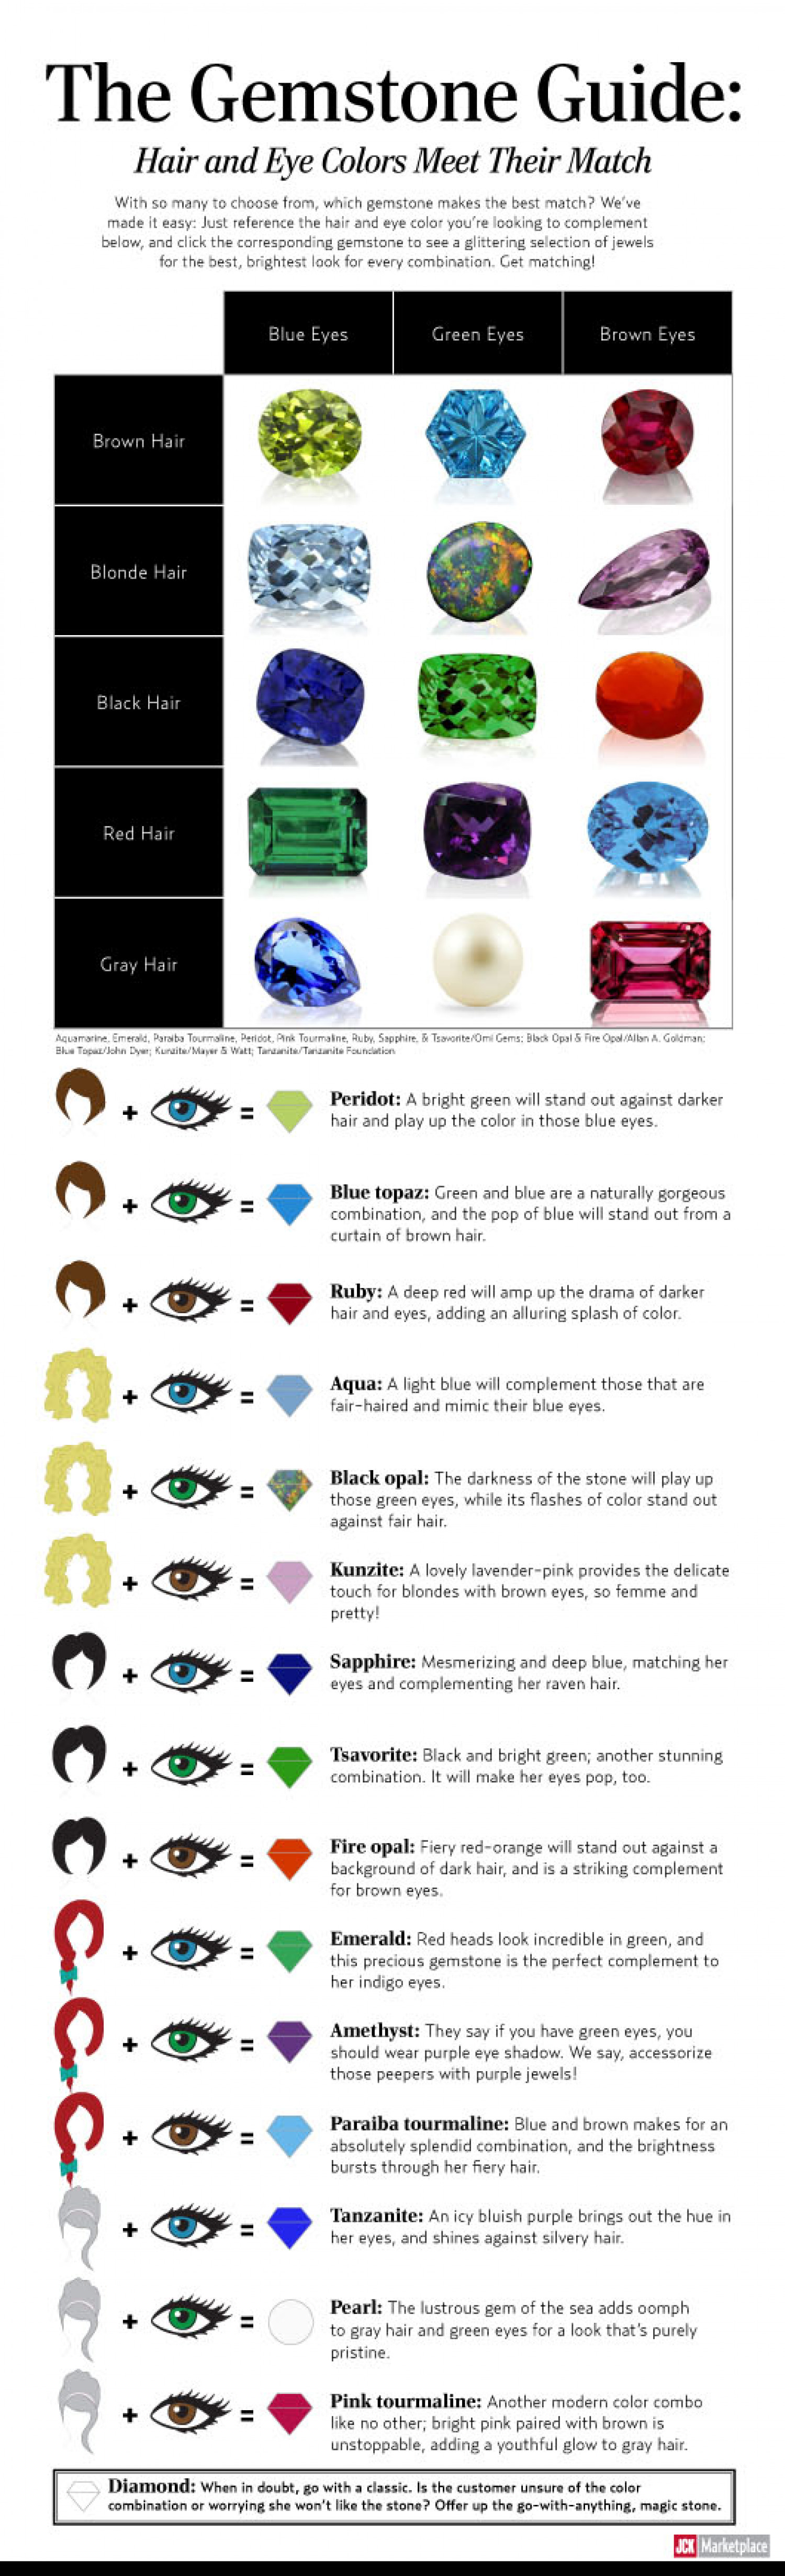 The Gemstone Guide: Hair and Eye Colors Meet Their Match Infographic